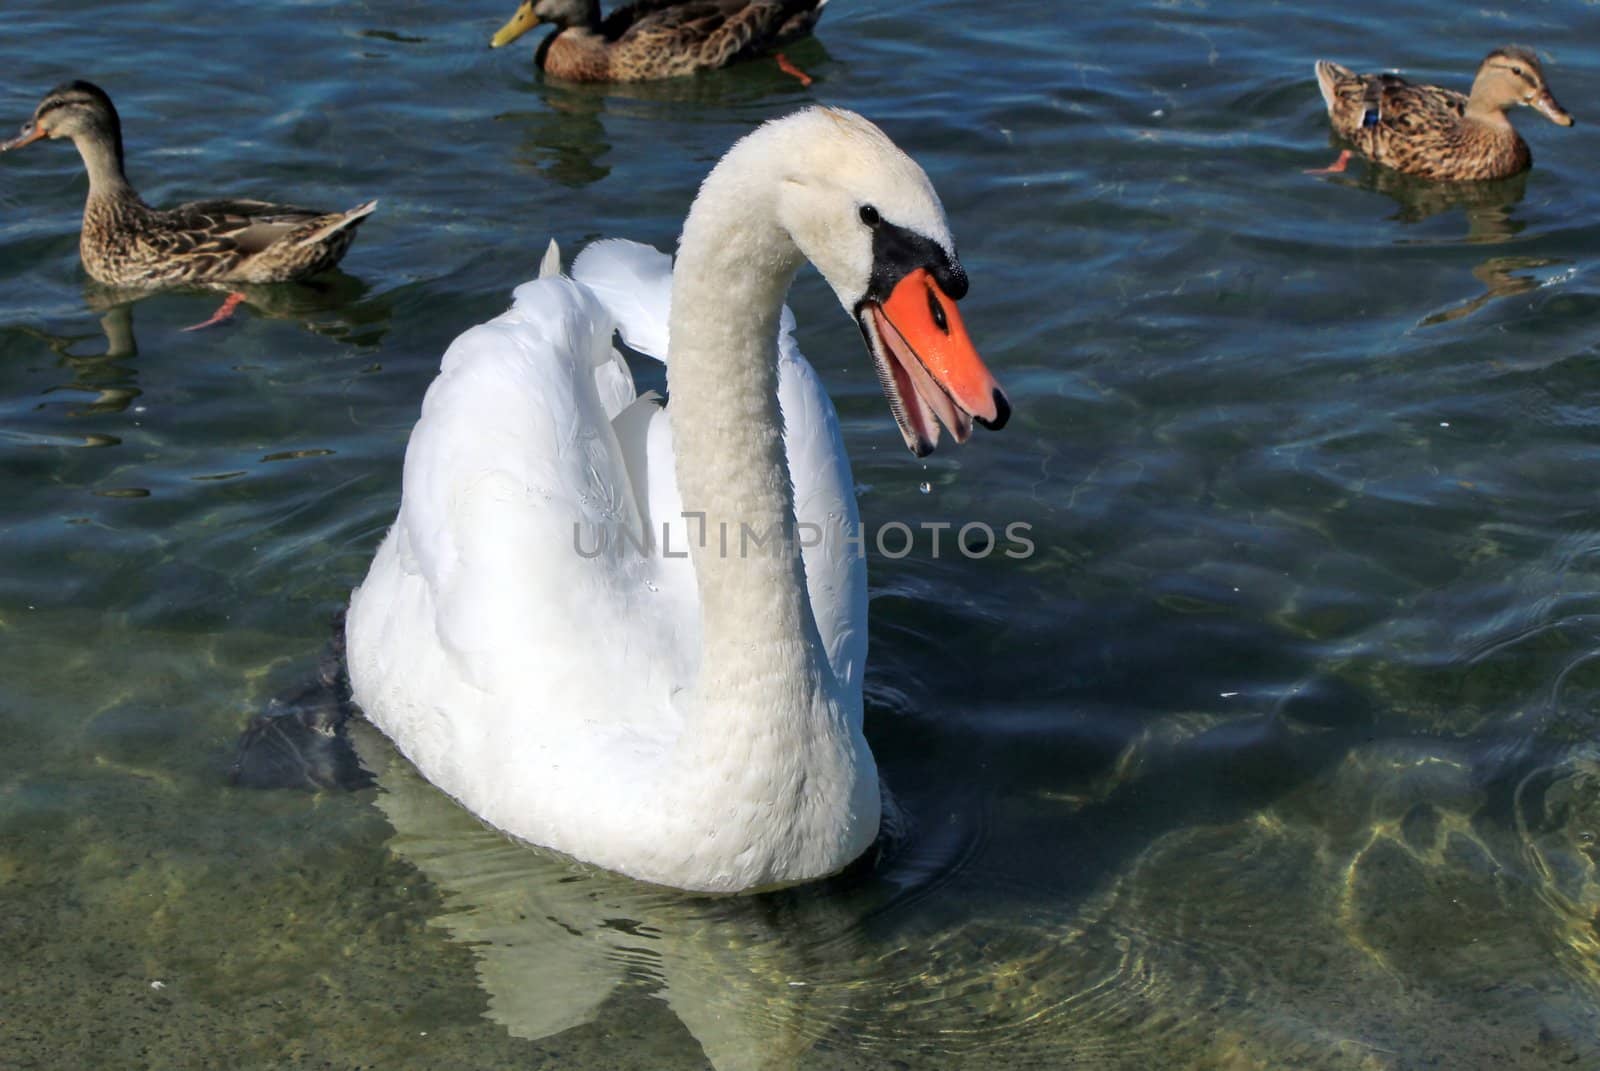 Angry swan by Elenaphotos21